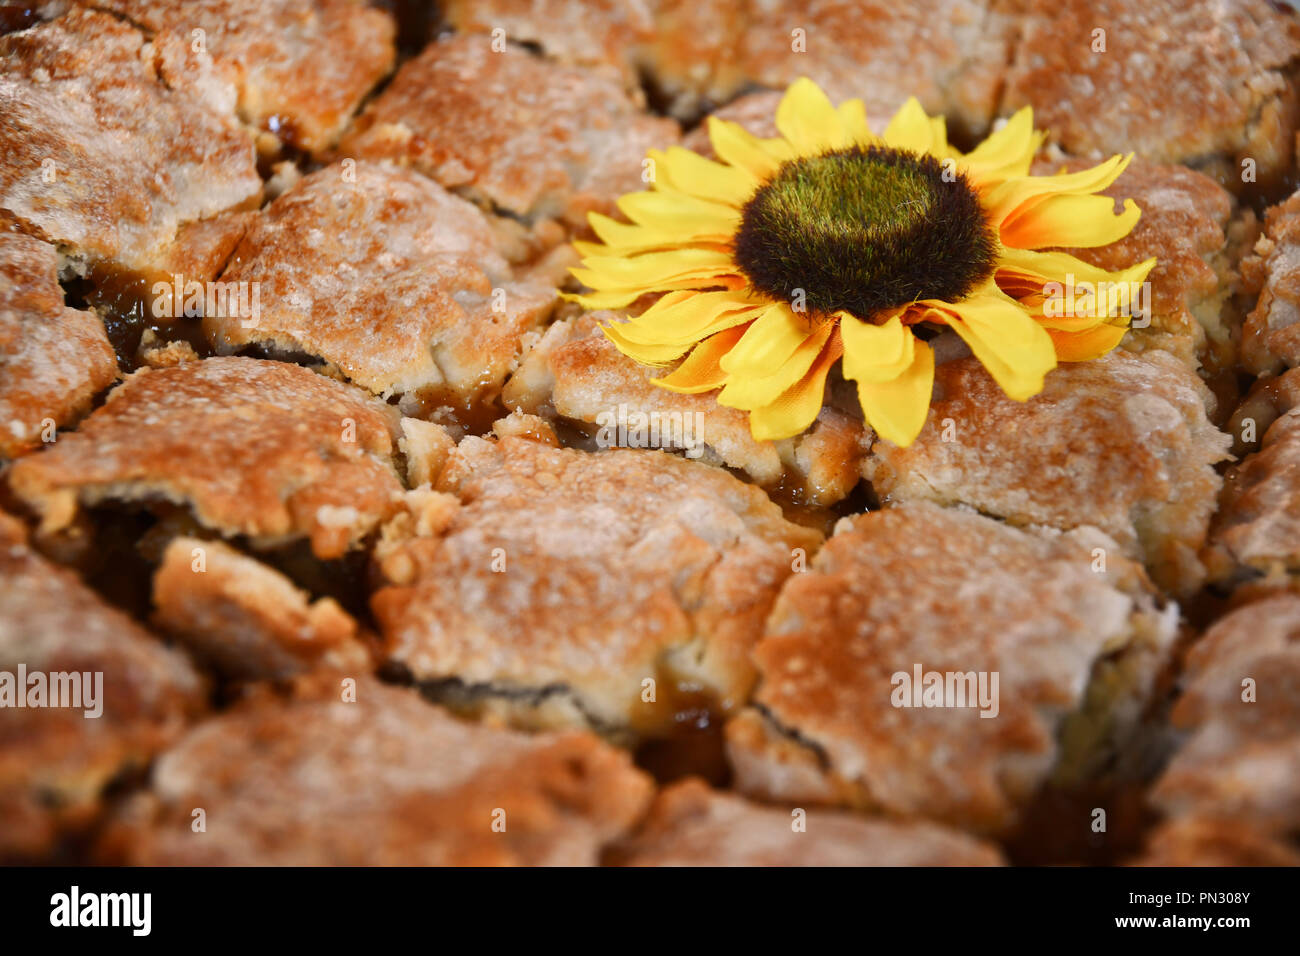 Cut up apple pie with a faux sunflower Stock Photo